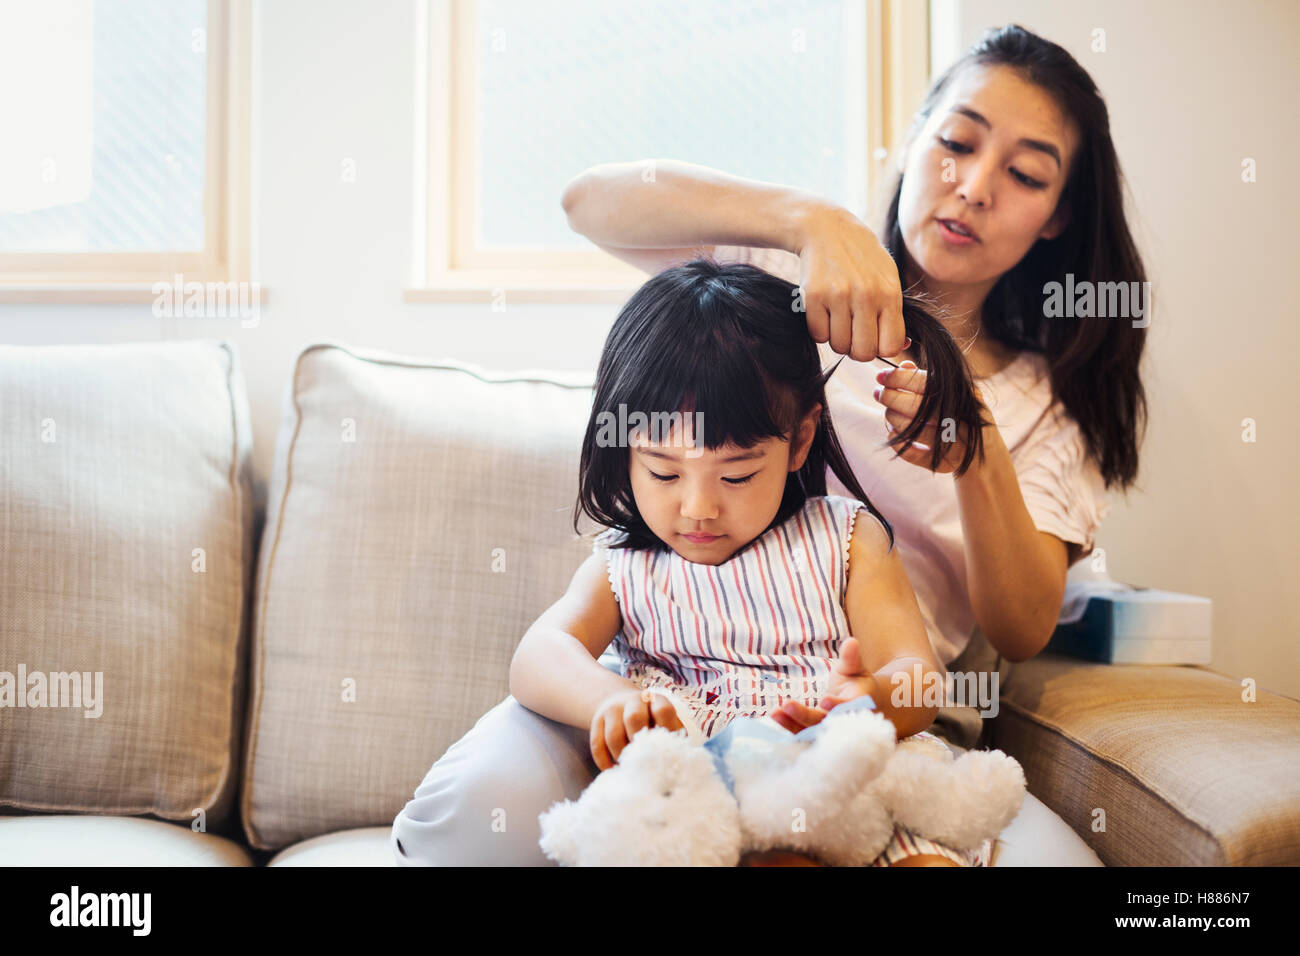 Family home. A mother combing her daughter's hair Stock Photo - Alamy